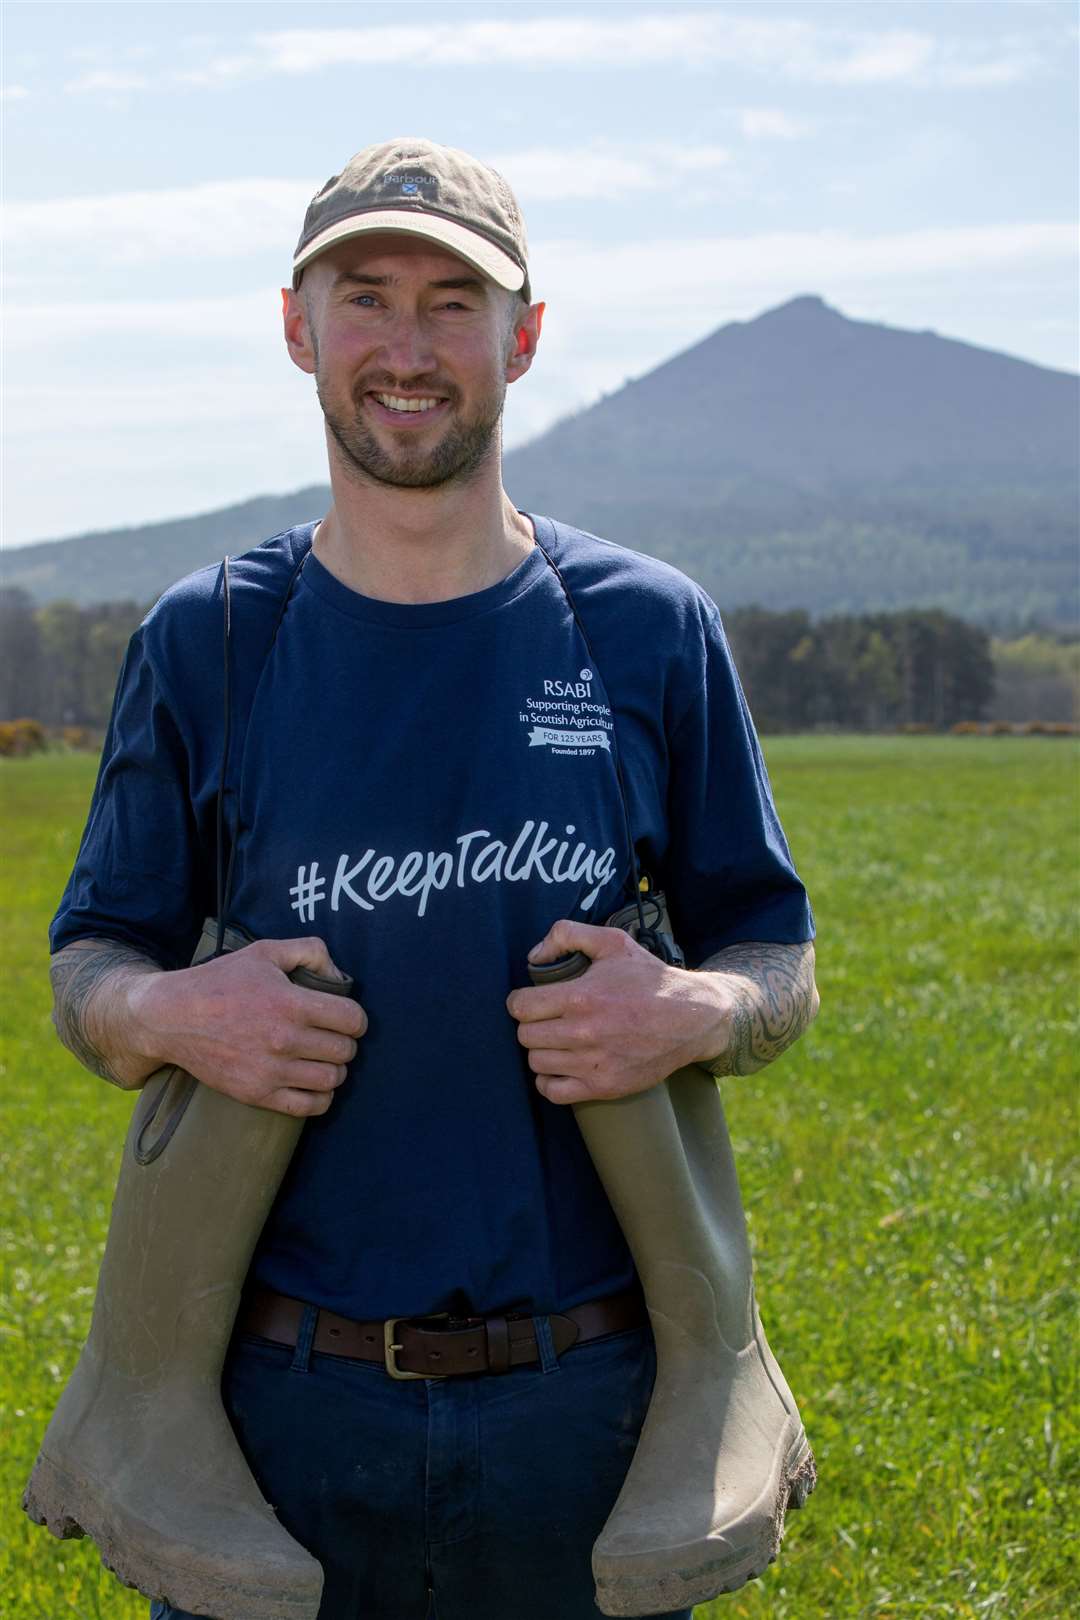 Duncan McLellan will tackle Bennachie a total of 17 time in his wellies - the same height as Everest.